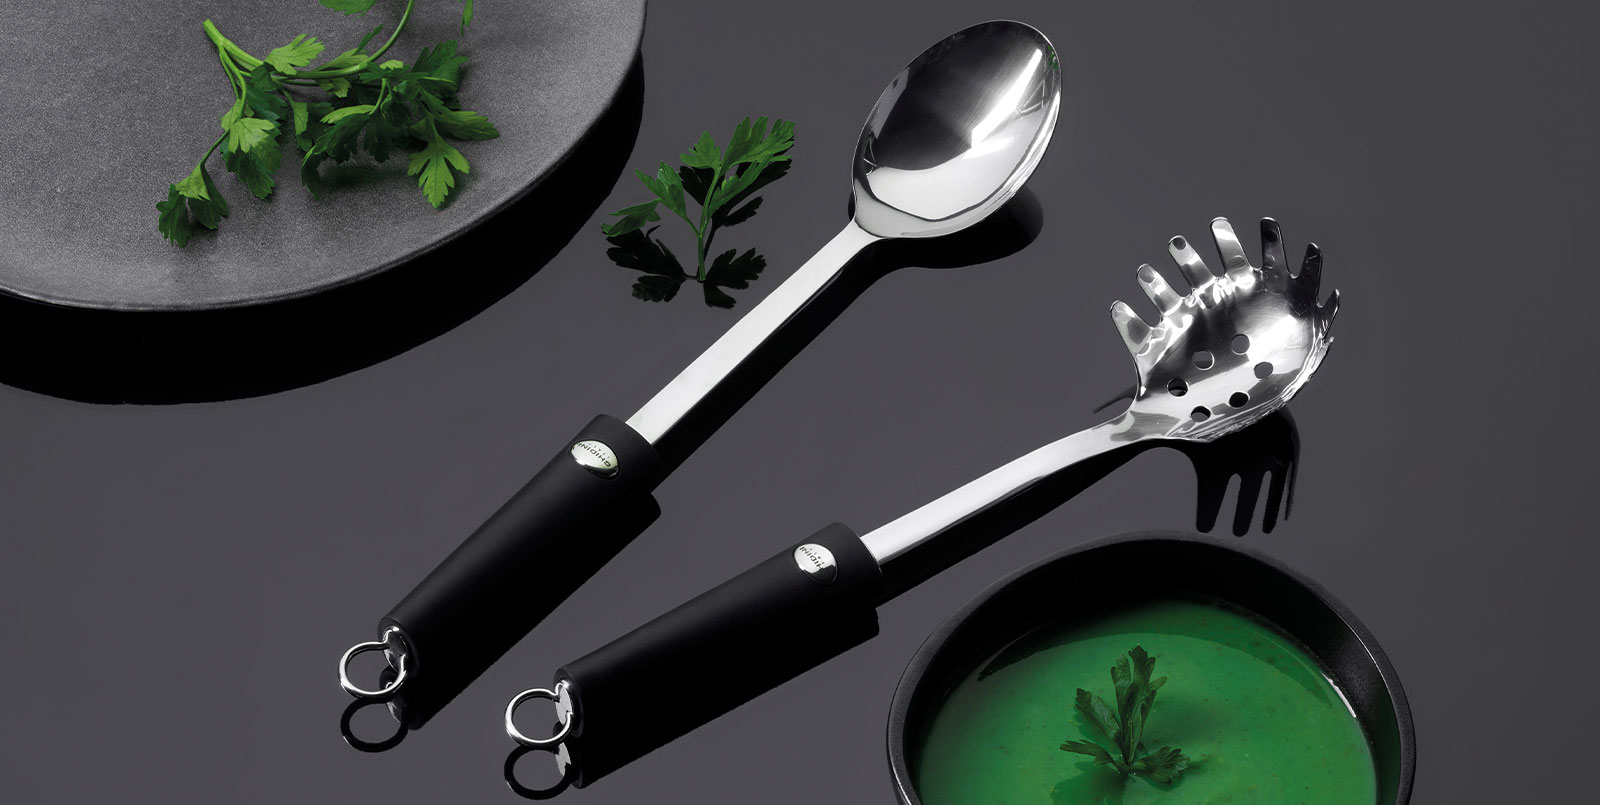 Exceptional Italian kitchen tools set made by Ghidini